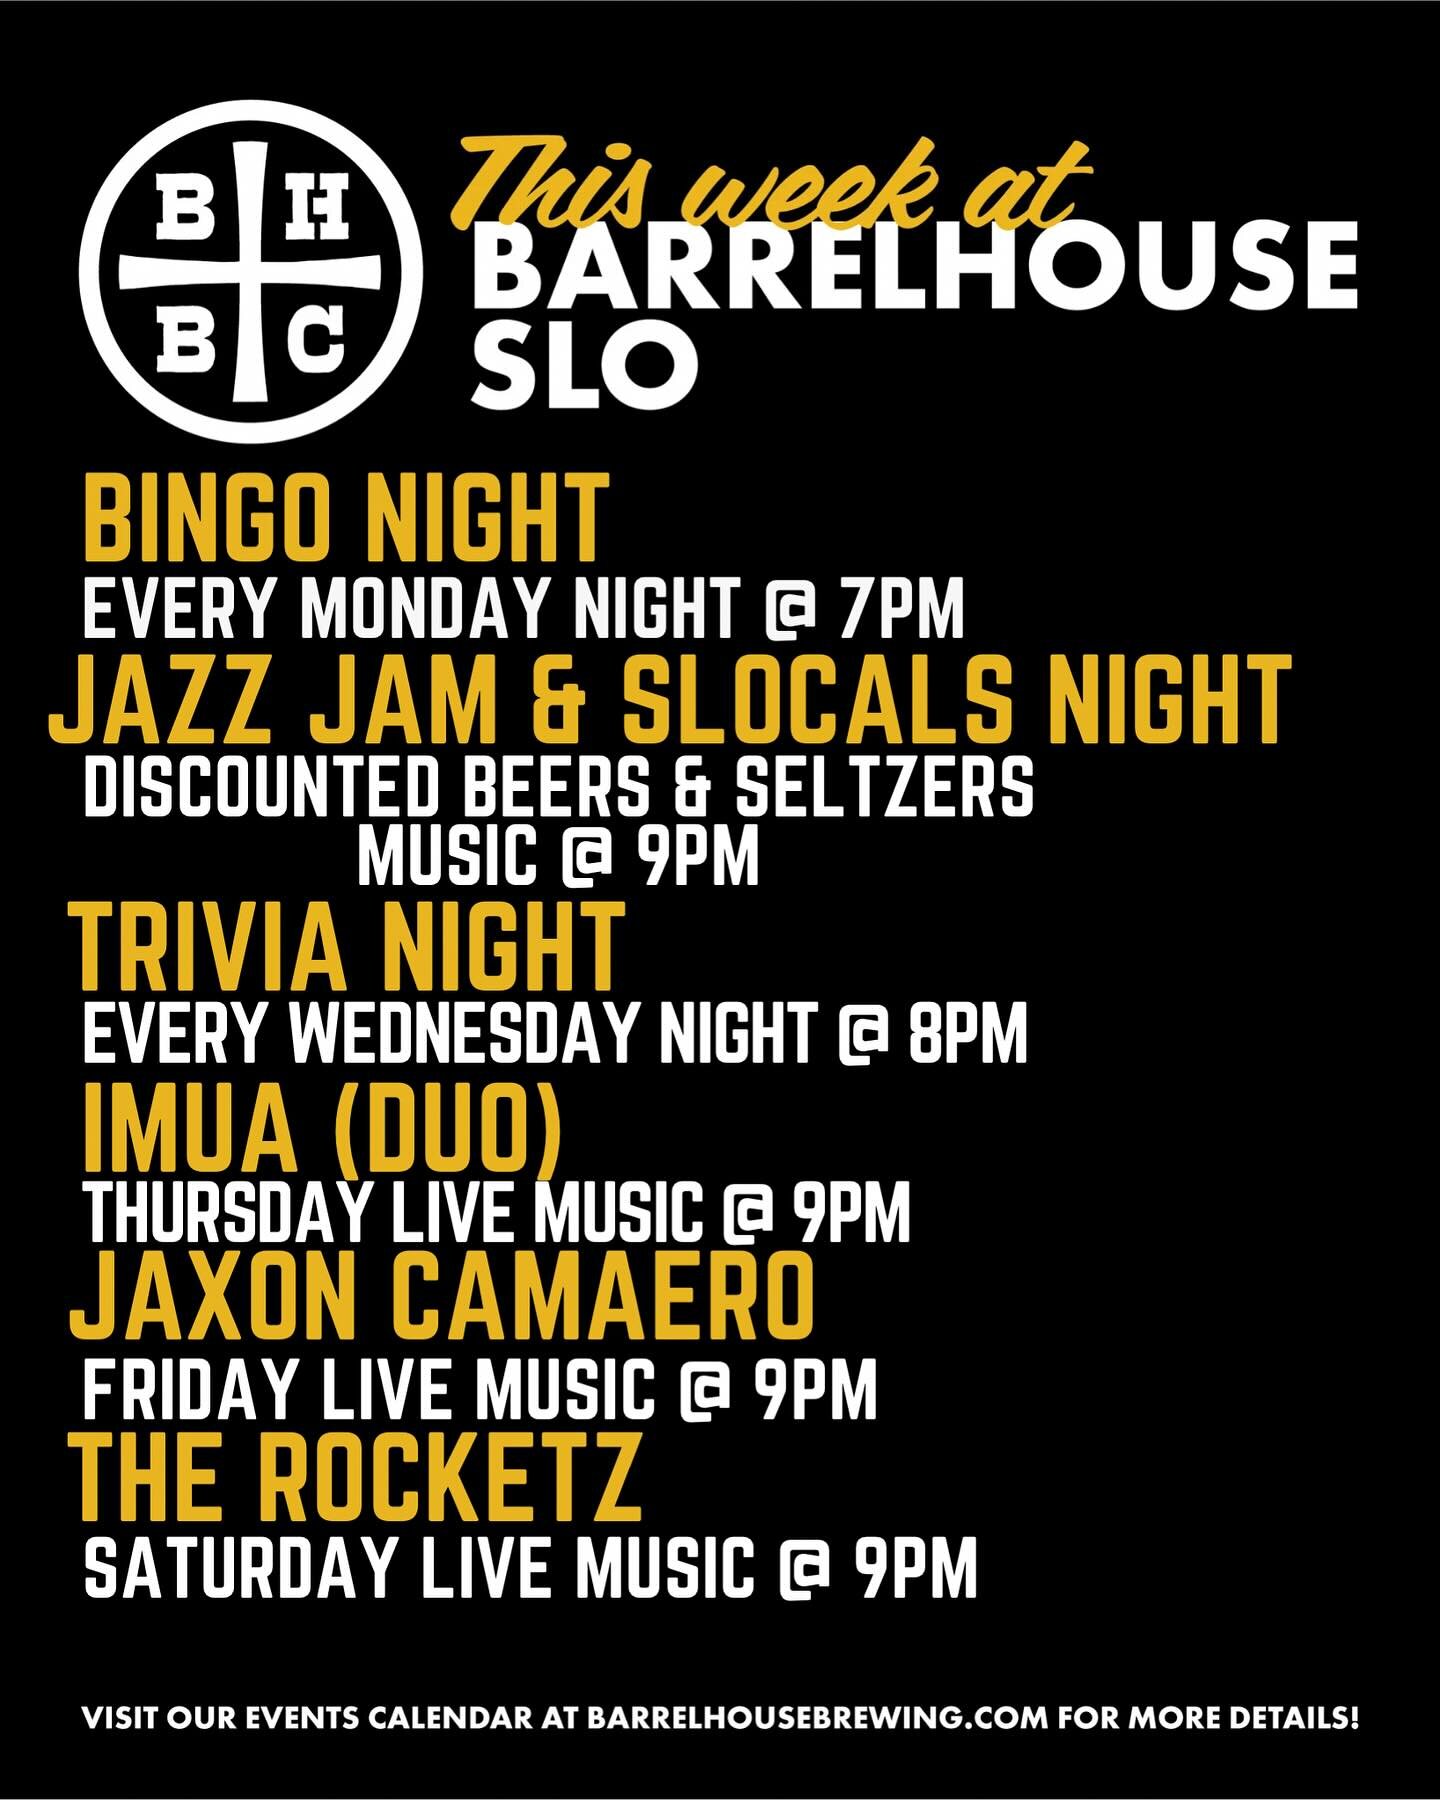 Don&rsquo;t worry, we will always have something going on at the taproom! 🙃

Come check out what&rsquo;s going down this week at Barrelhouse in downtown SLO! 🙌🏻

Tonight kicks off our week with Bingo Night at 7pm! 🤠

Cheers! 🍻

#barrelhousebrewi